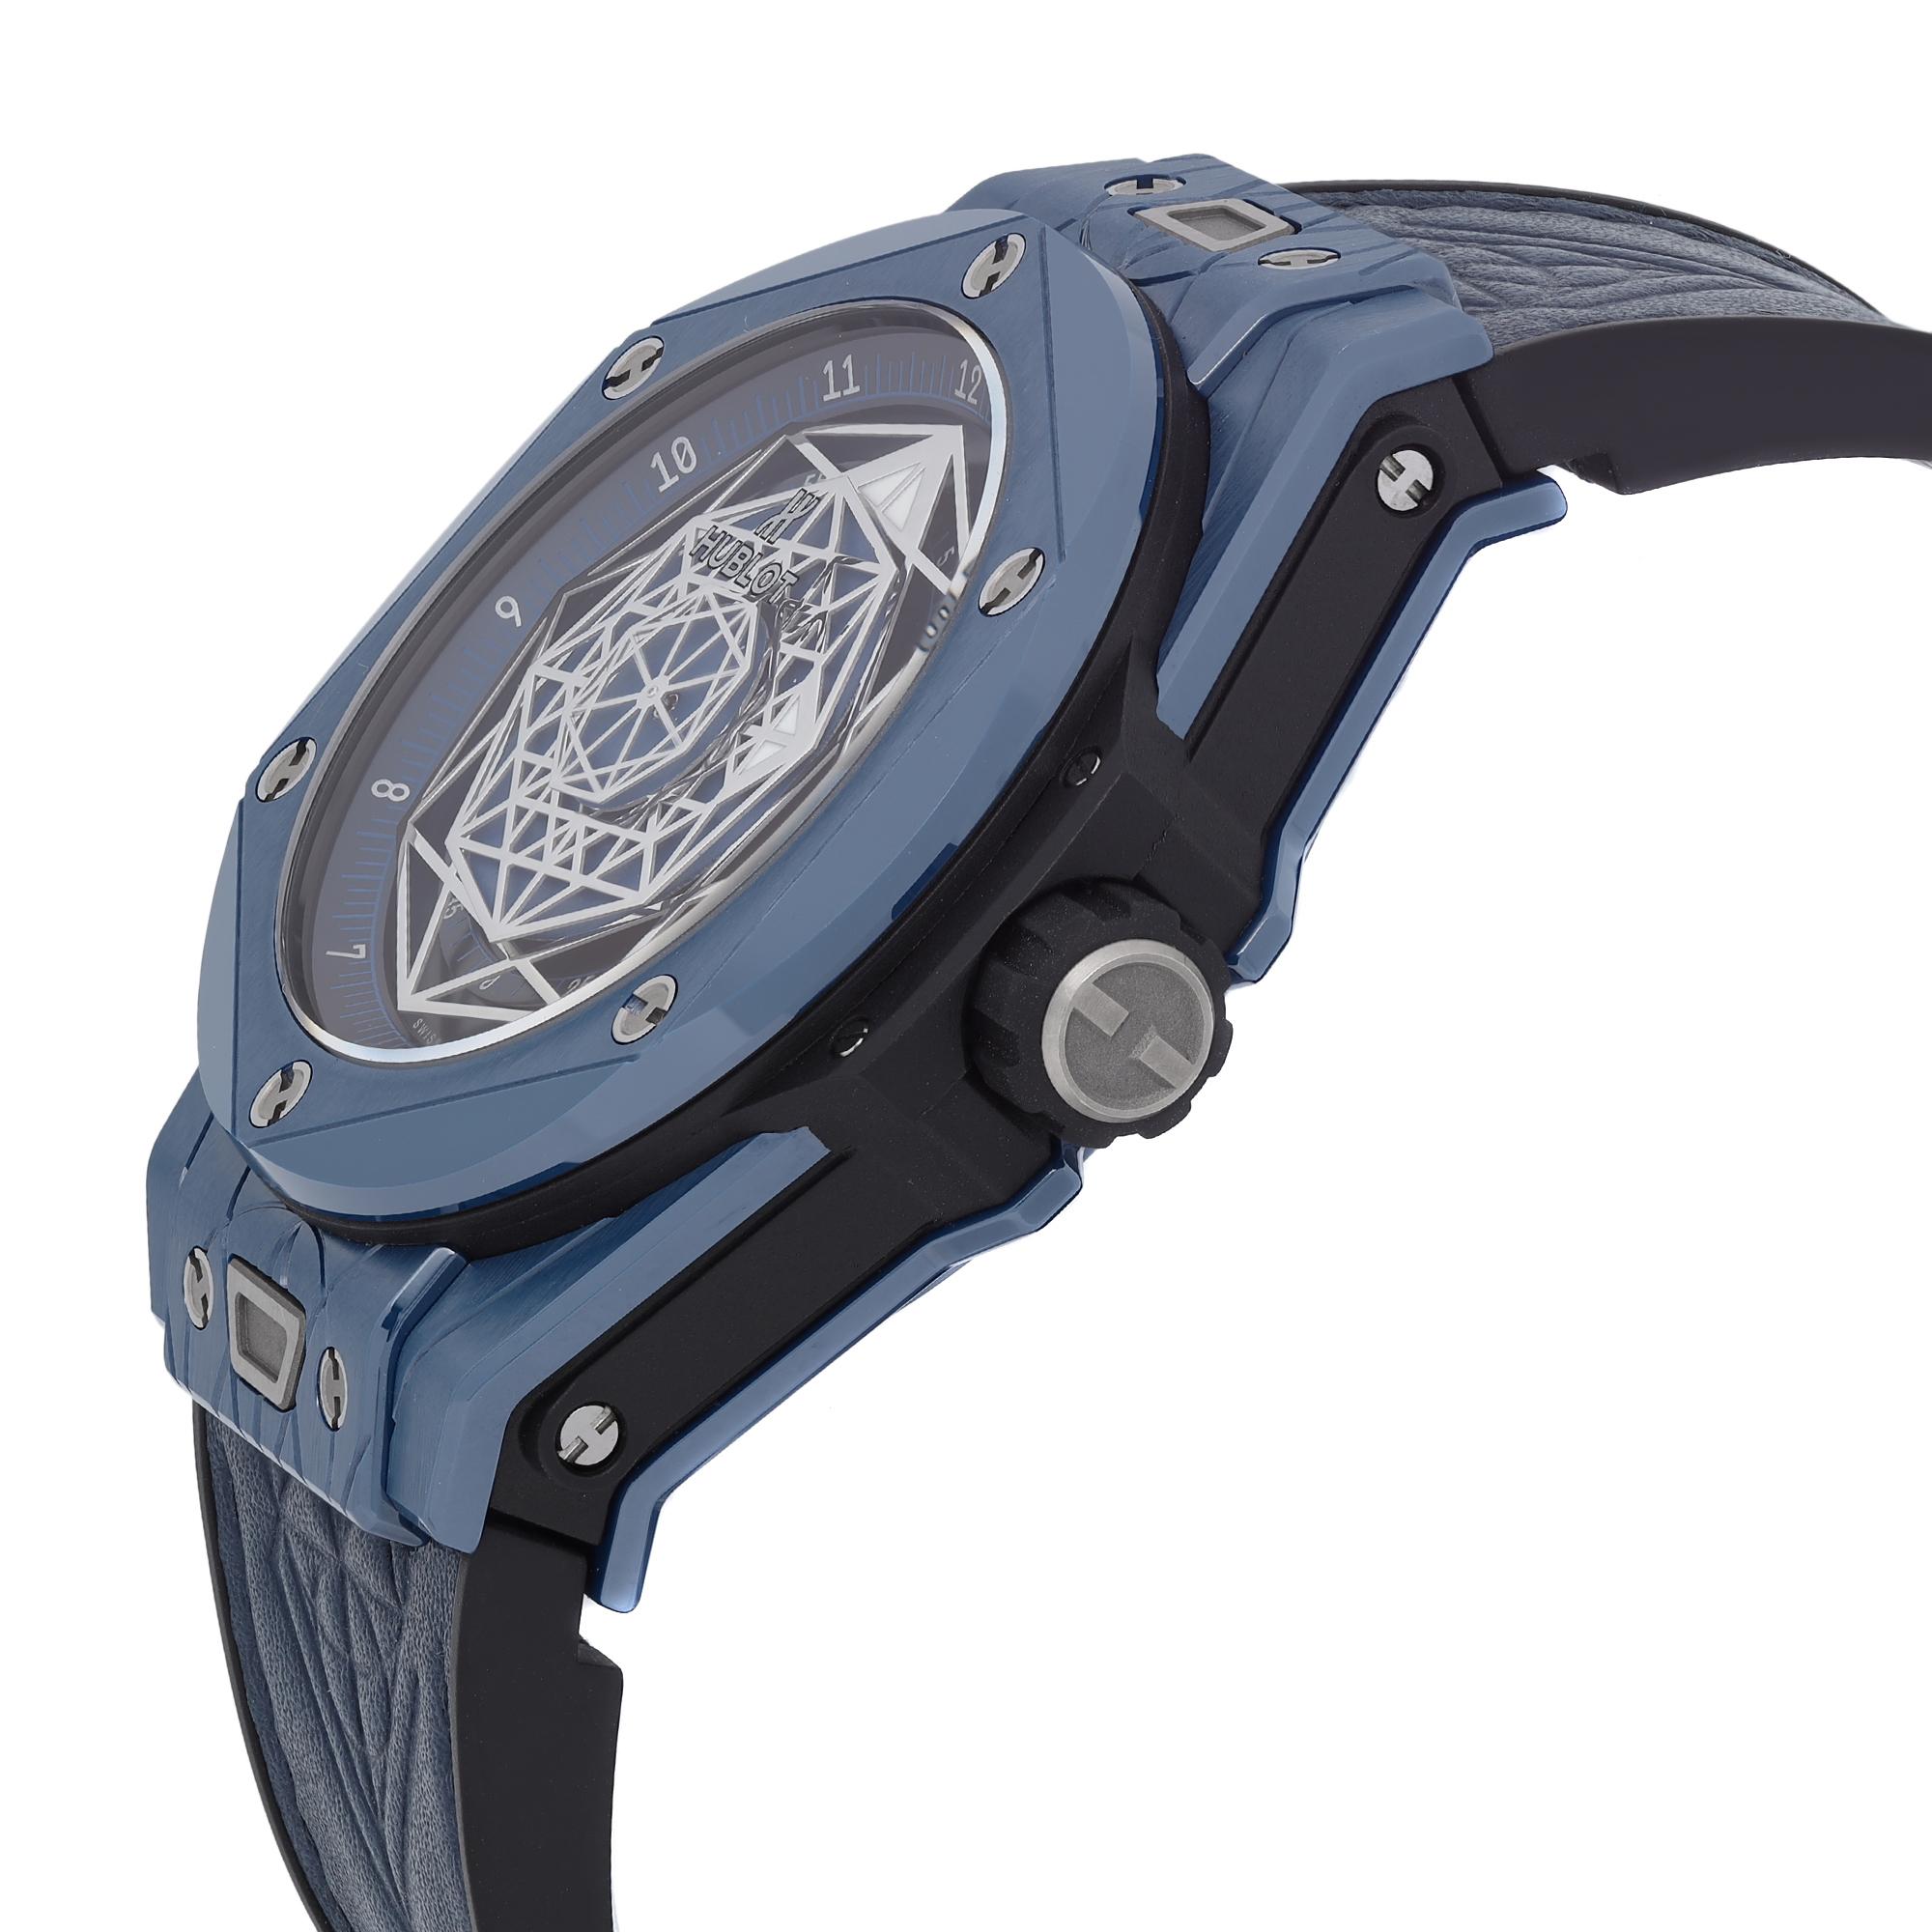 Hublot Big Bang Sang Bleu II Ceramic Blue Dial Watch 415.EX.7179.VR.MXM19 In Excellent Condition For Sale In New York, NY